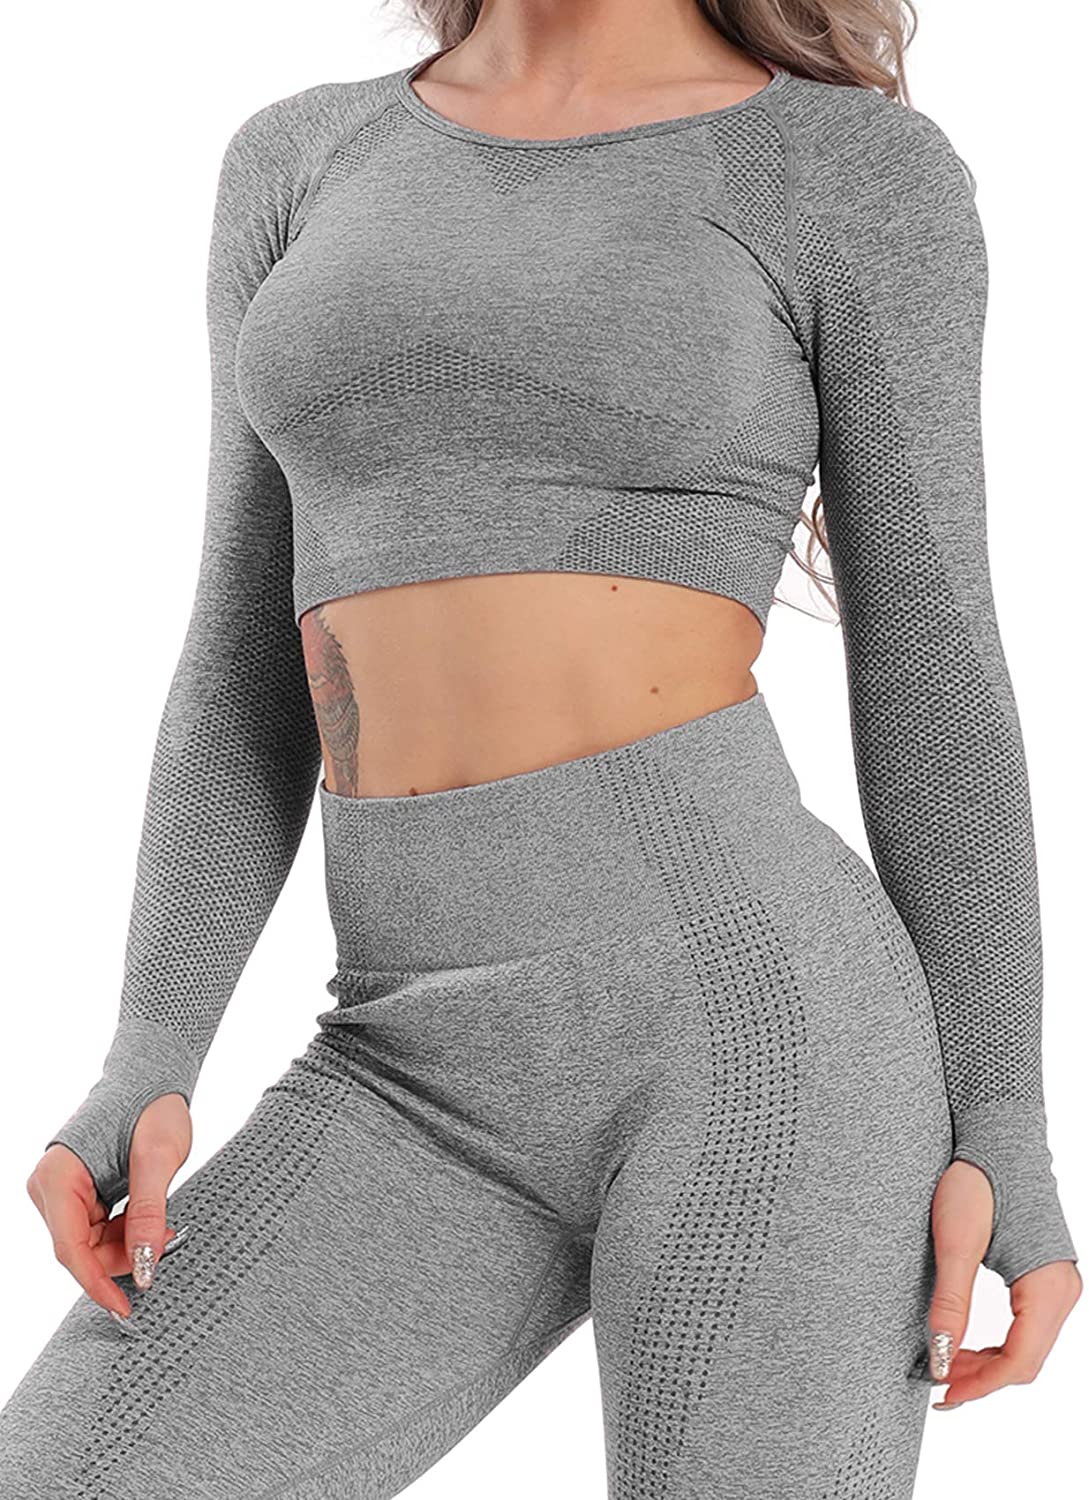 15 Minute Workout crop top short sleeve with Comfort Workout Clothes